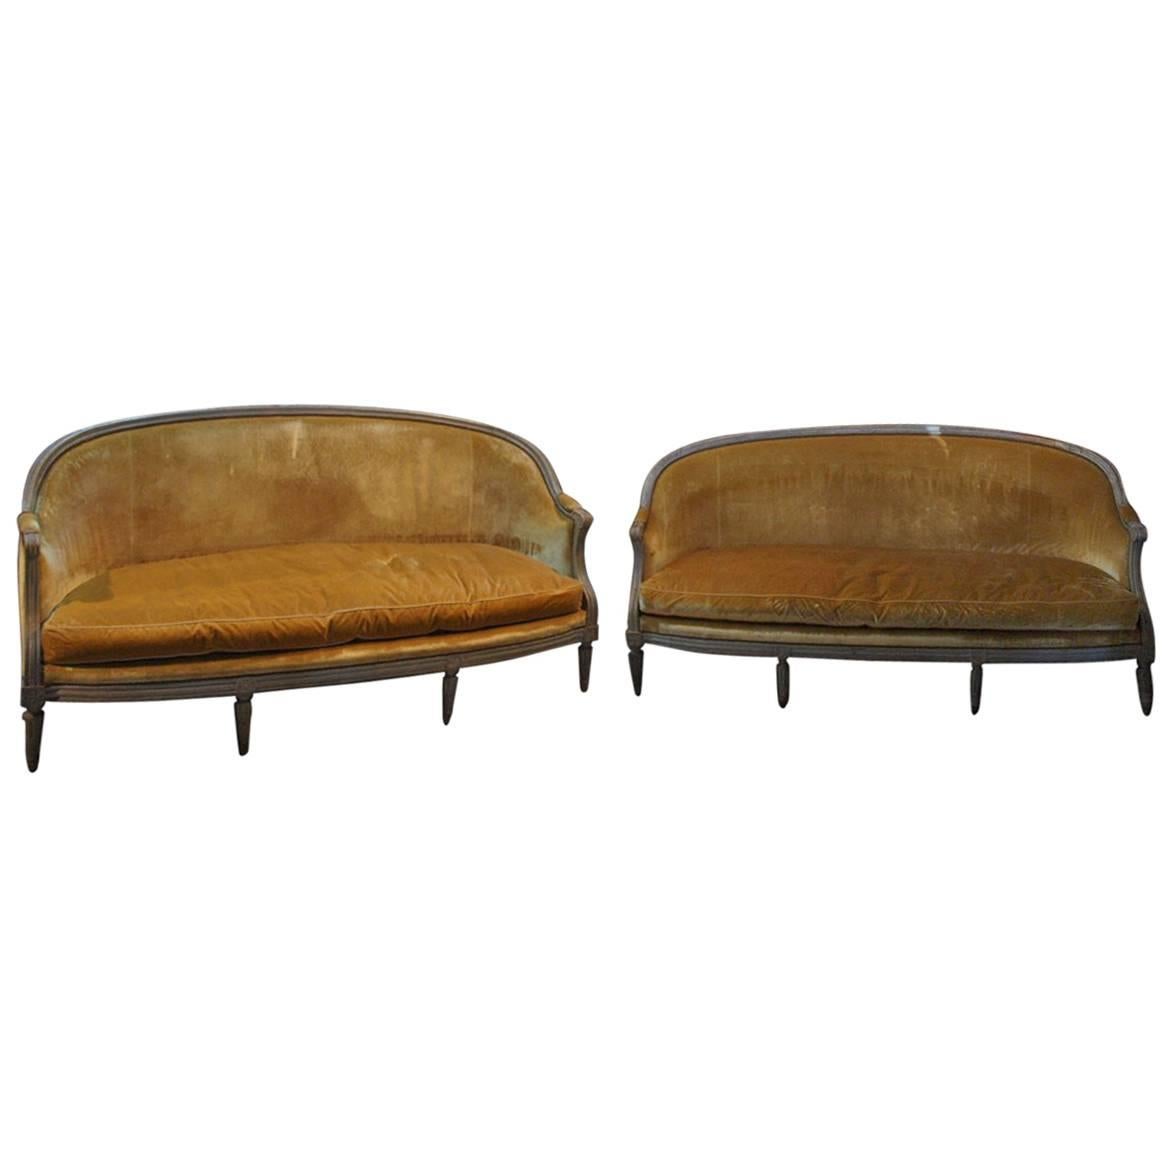 Exceptional Pair of 19th Century French Louis XVI Style Banquettes